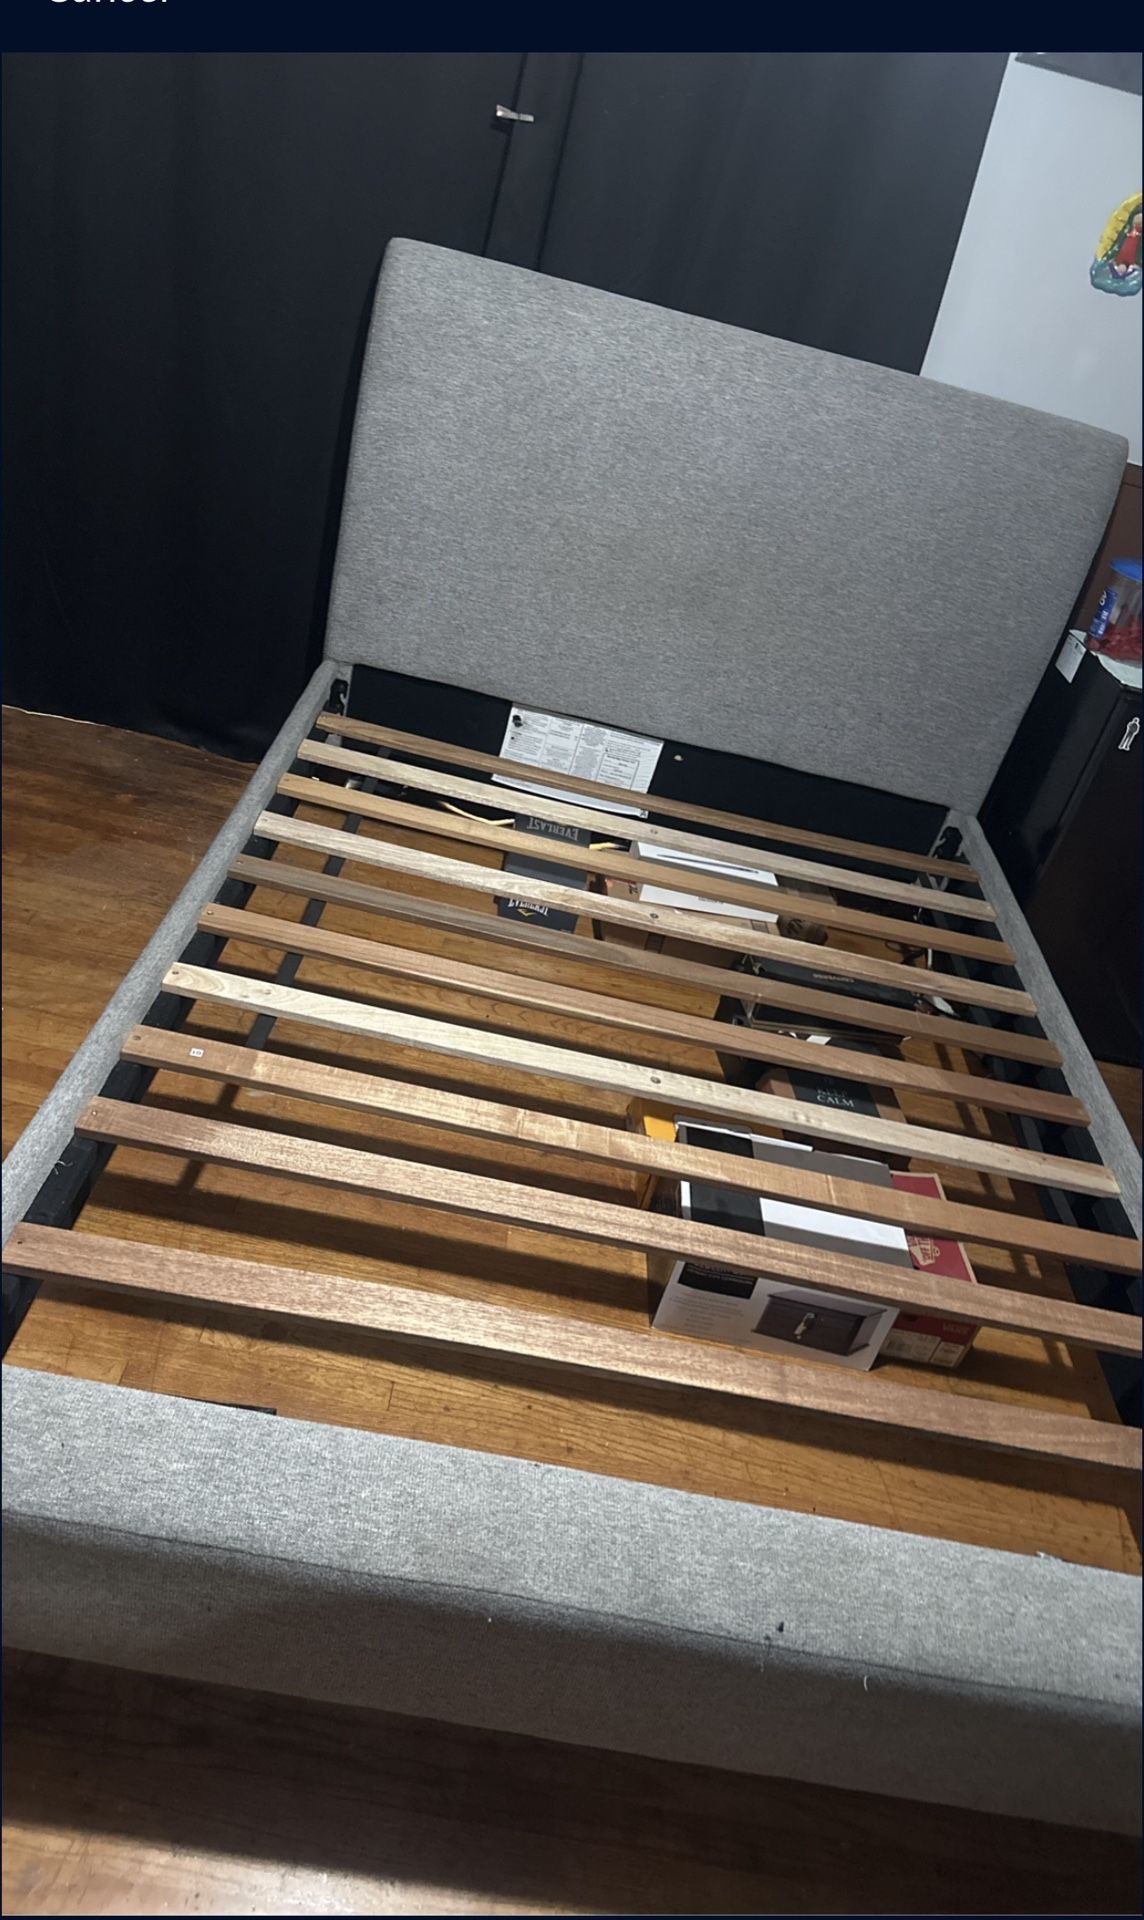 Free Queen Bed Frame 